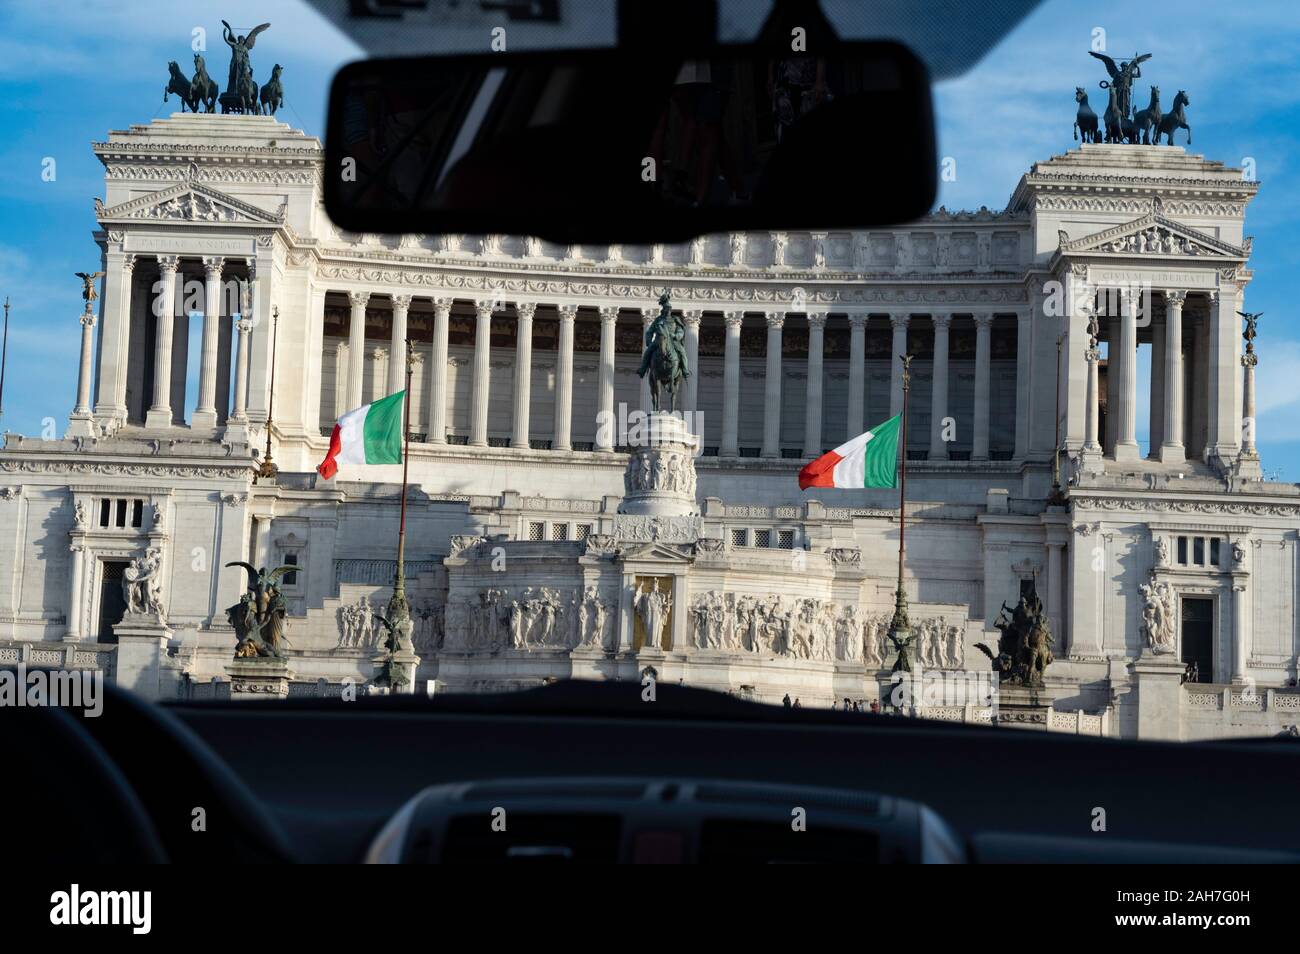 Taxi ride in Rome, Italy Stock Photo